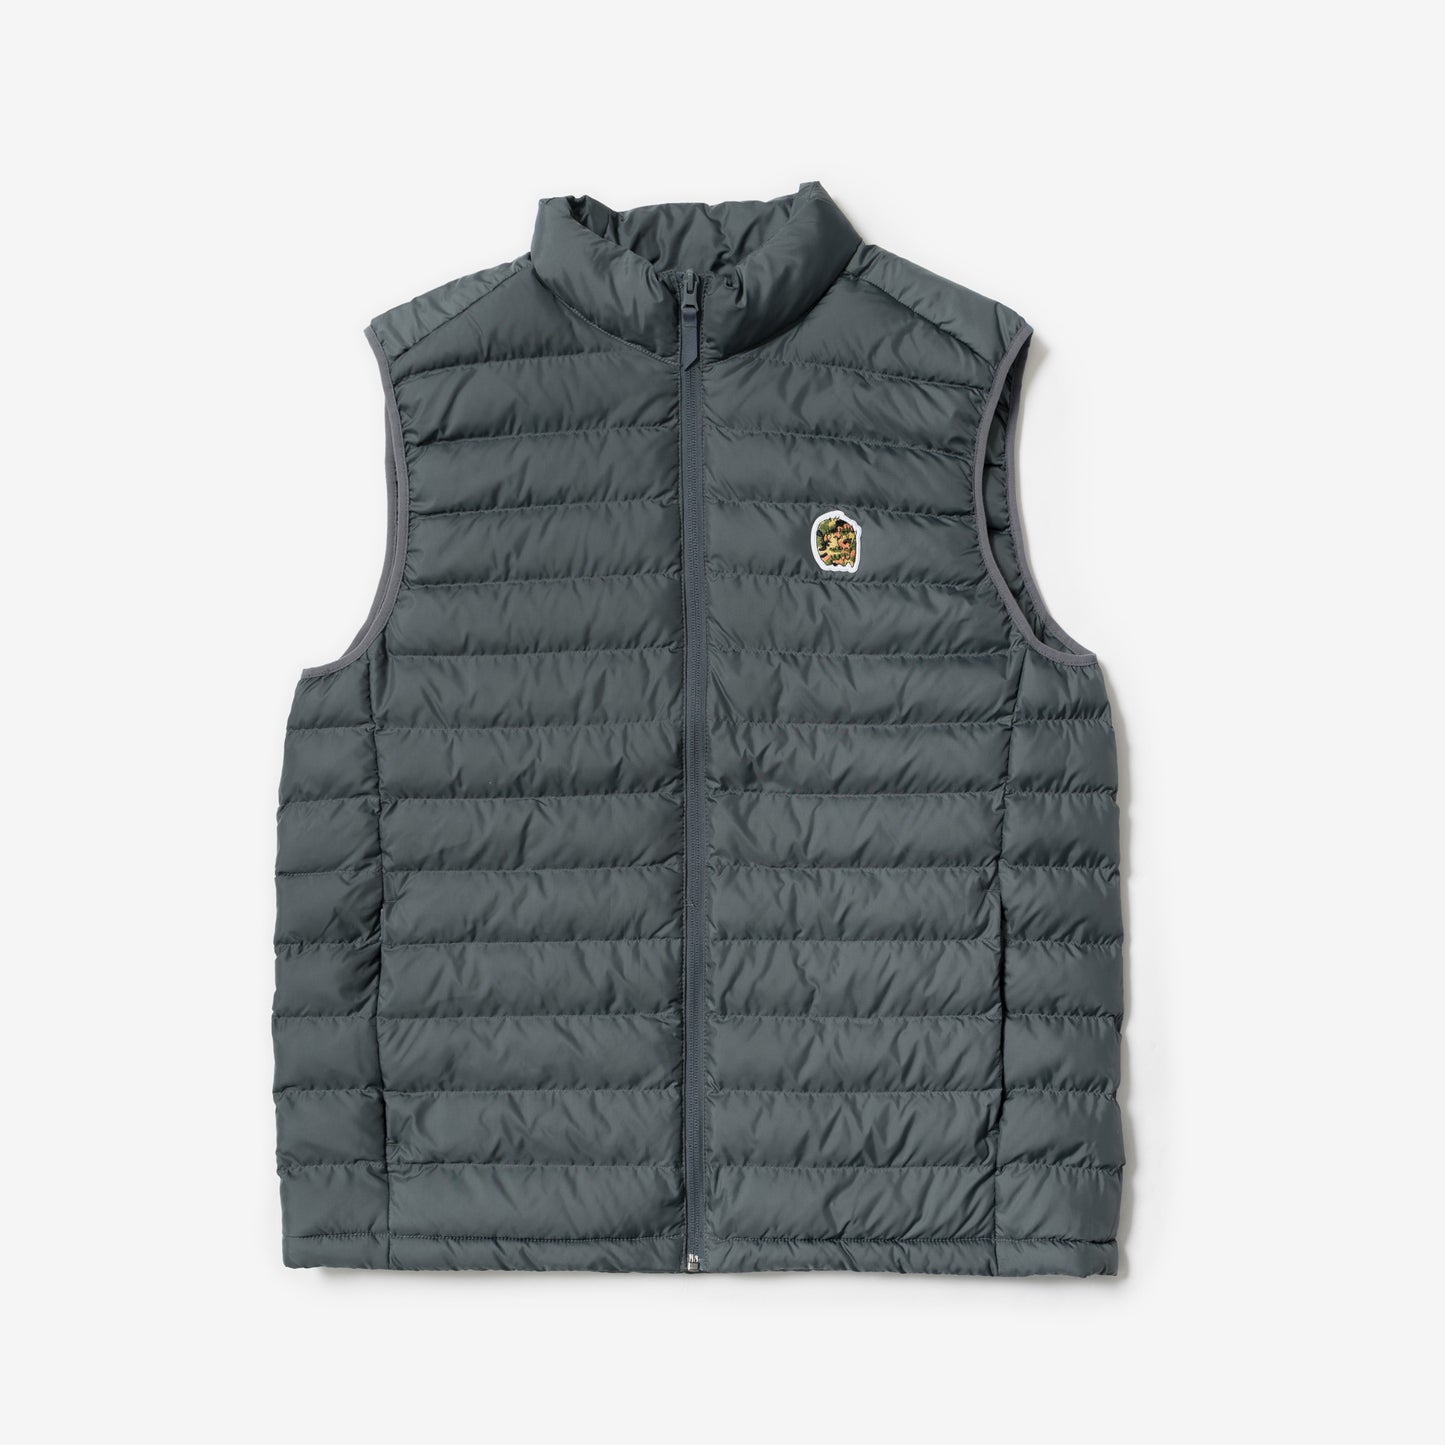 FORTY Kelso Gilet (Grey) xccscss.